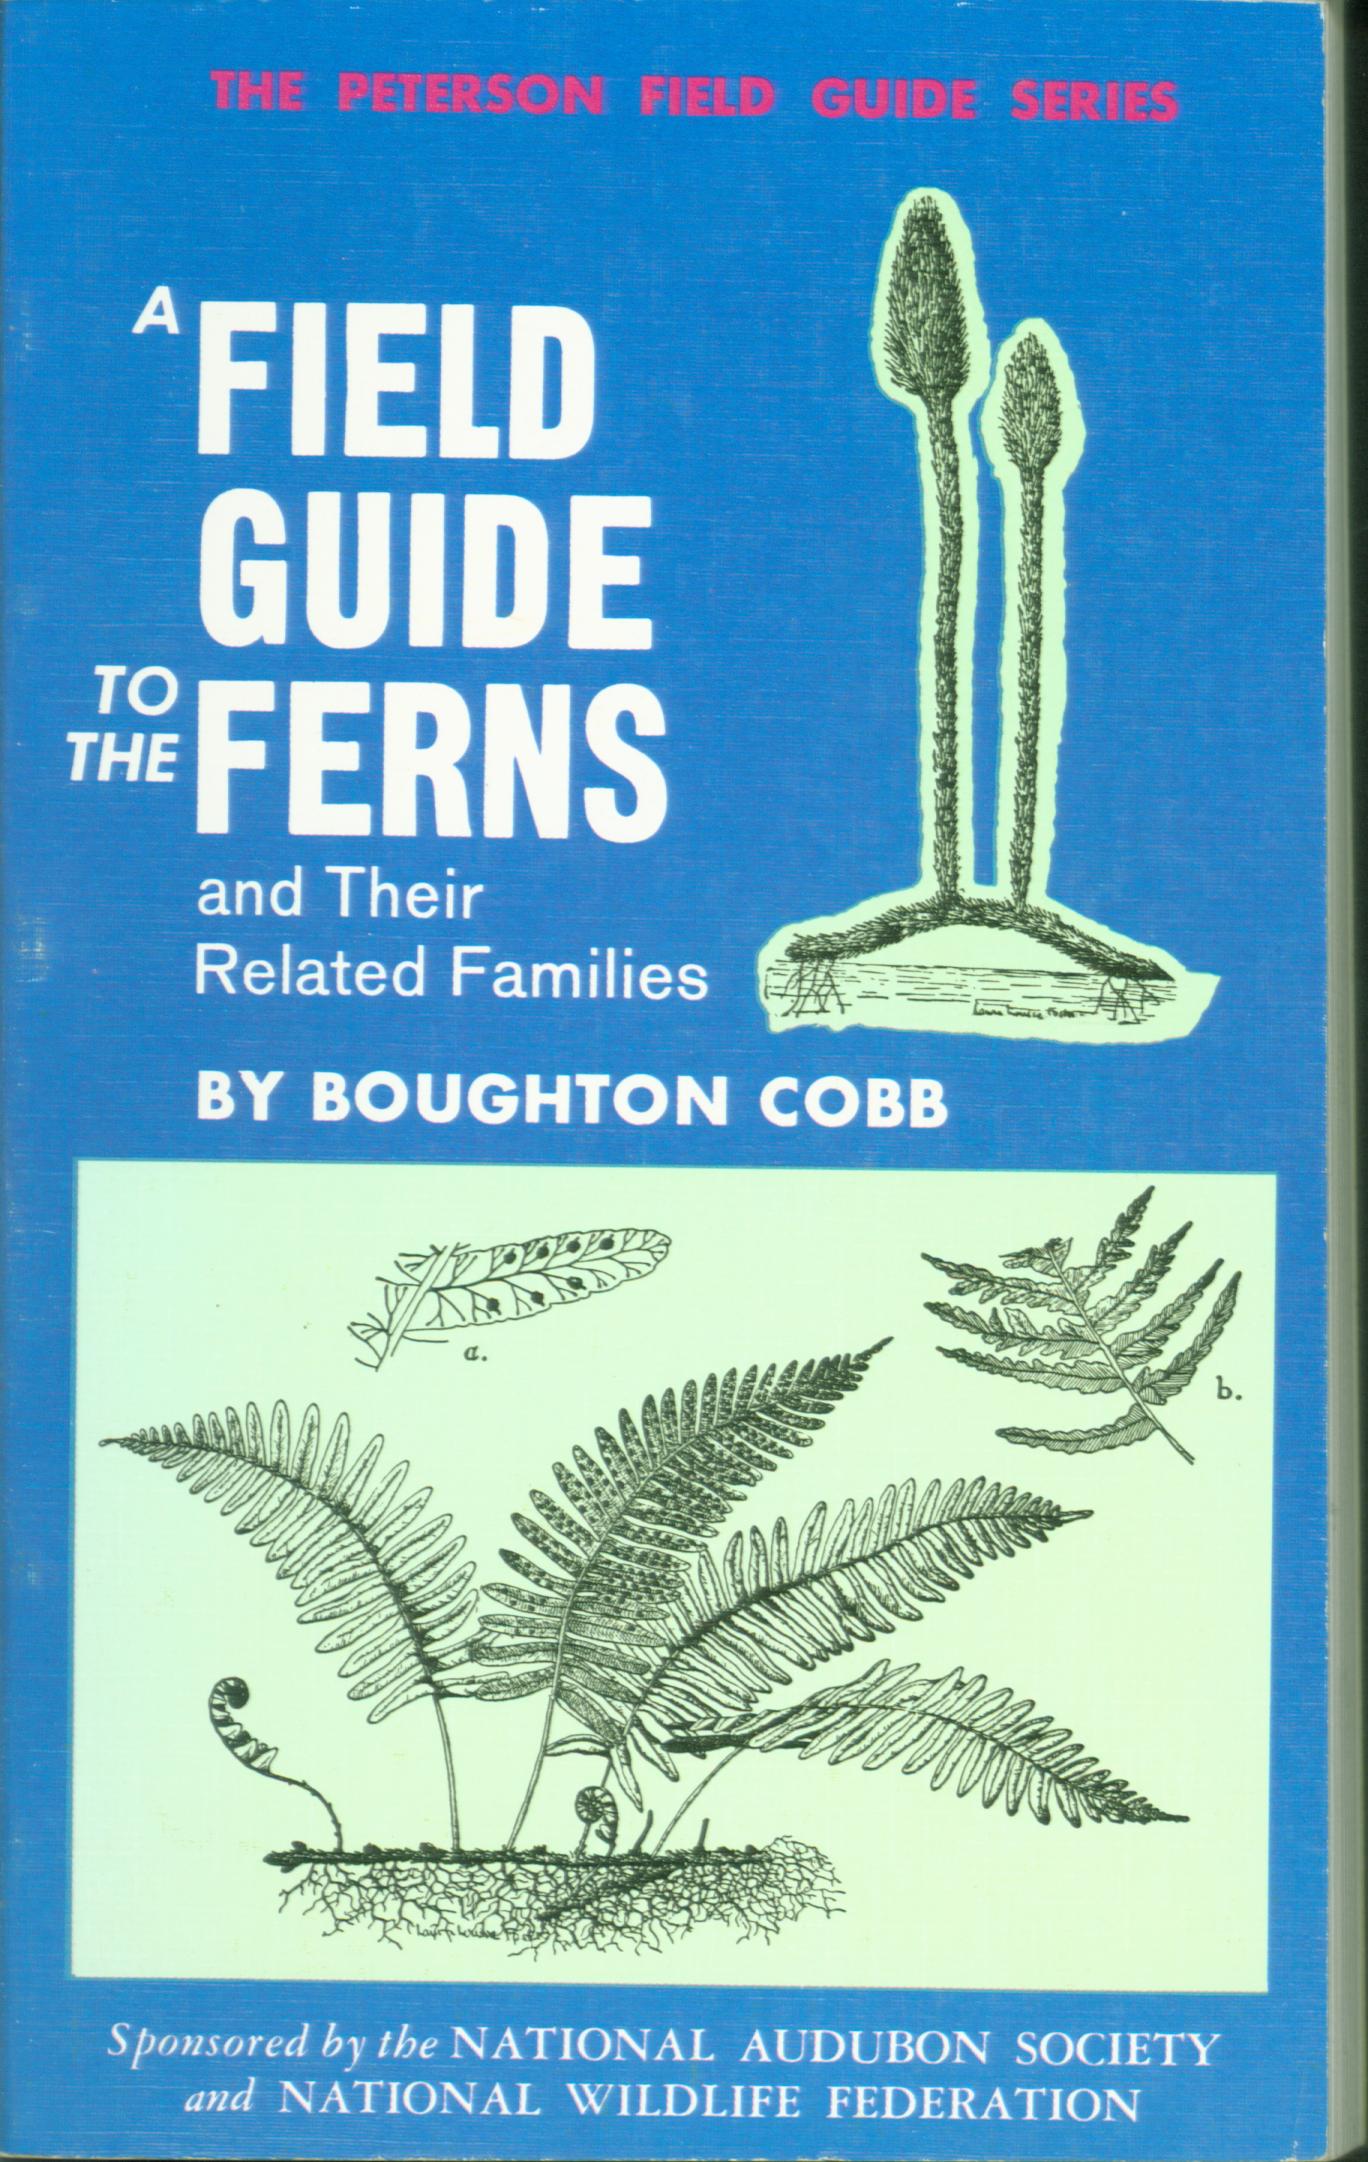 A FIELD GUIDE TO THE FERNS AND THEIR RELATED FAMILIES of northeastern & central North America